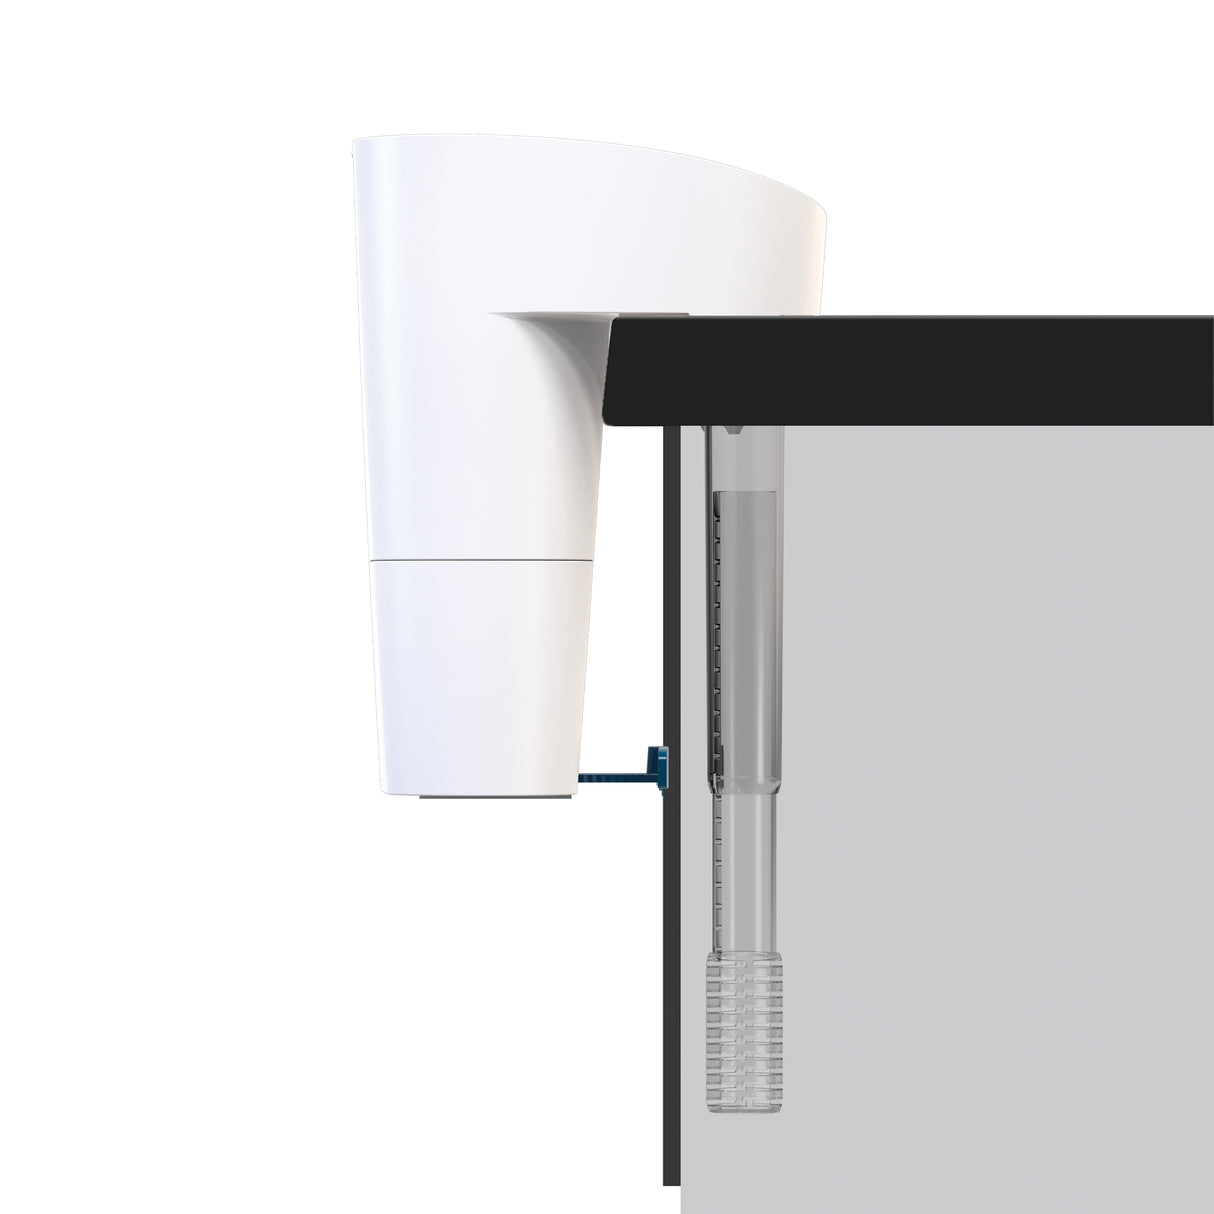 OASE BioStyle 20 White features Adjustable Lever